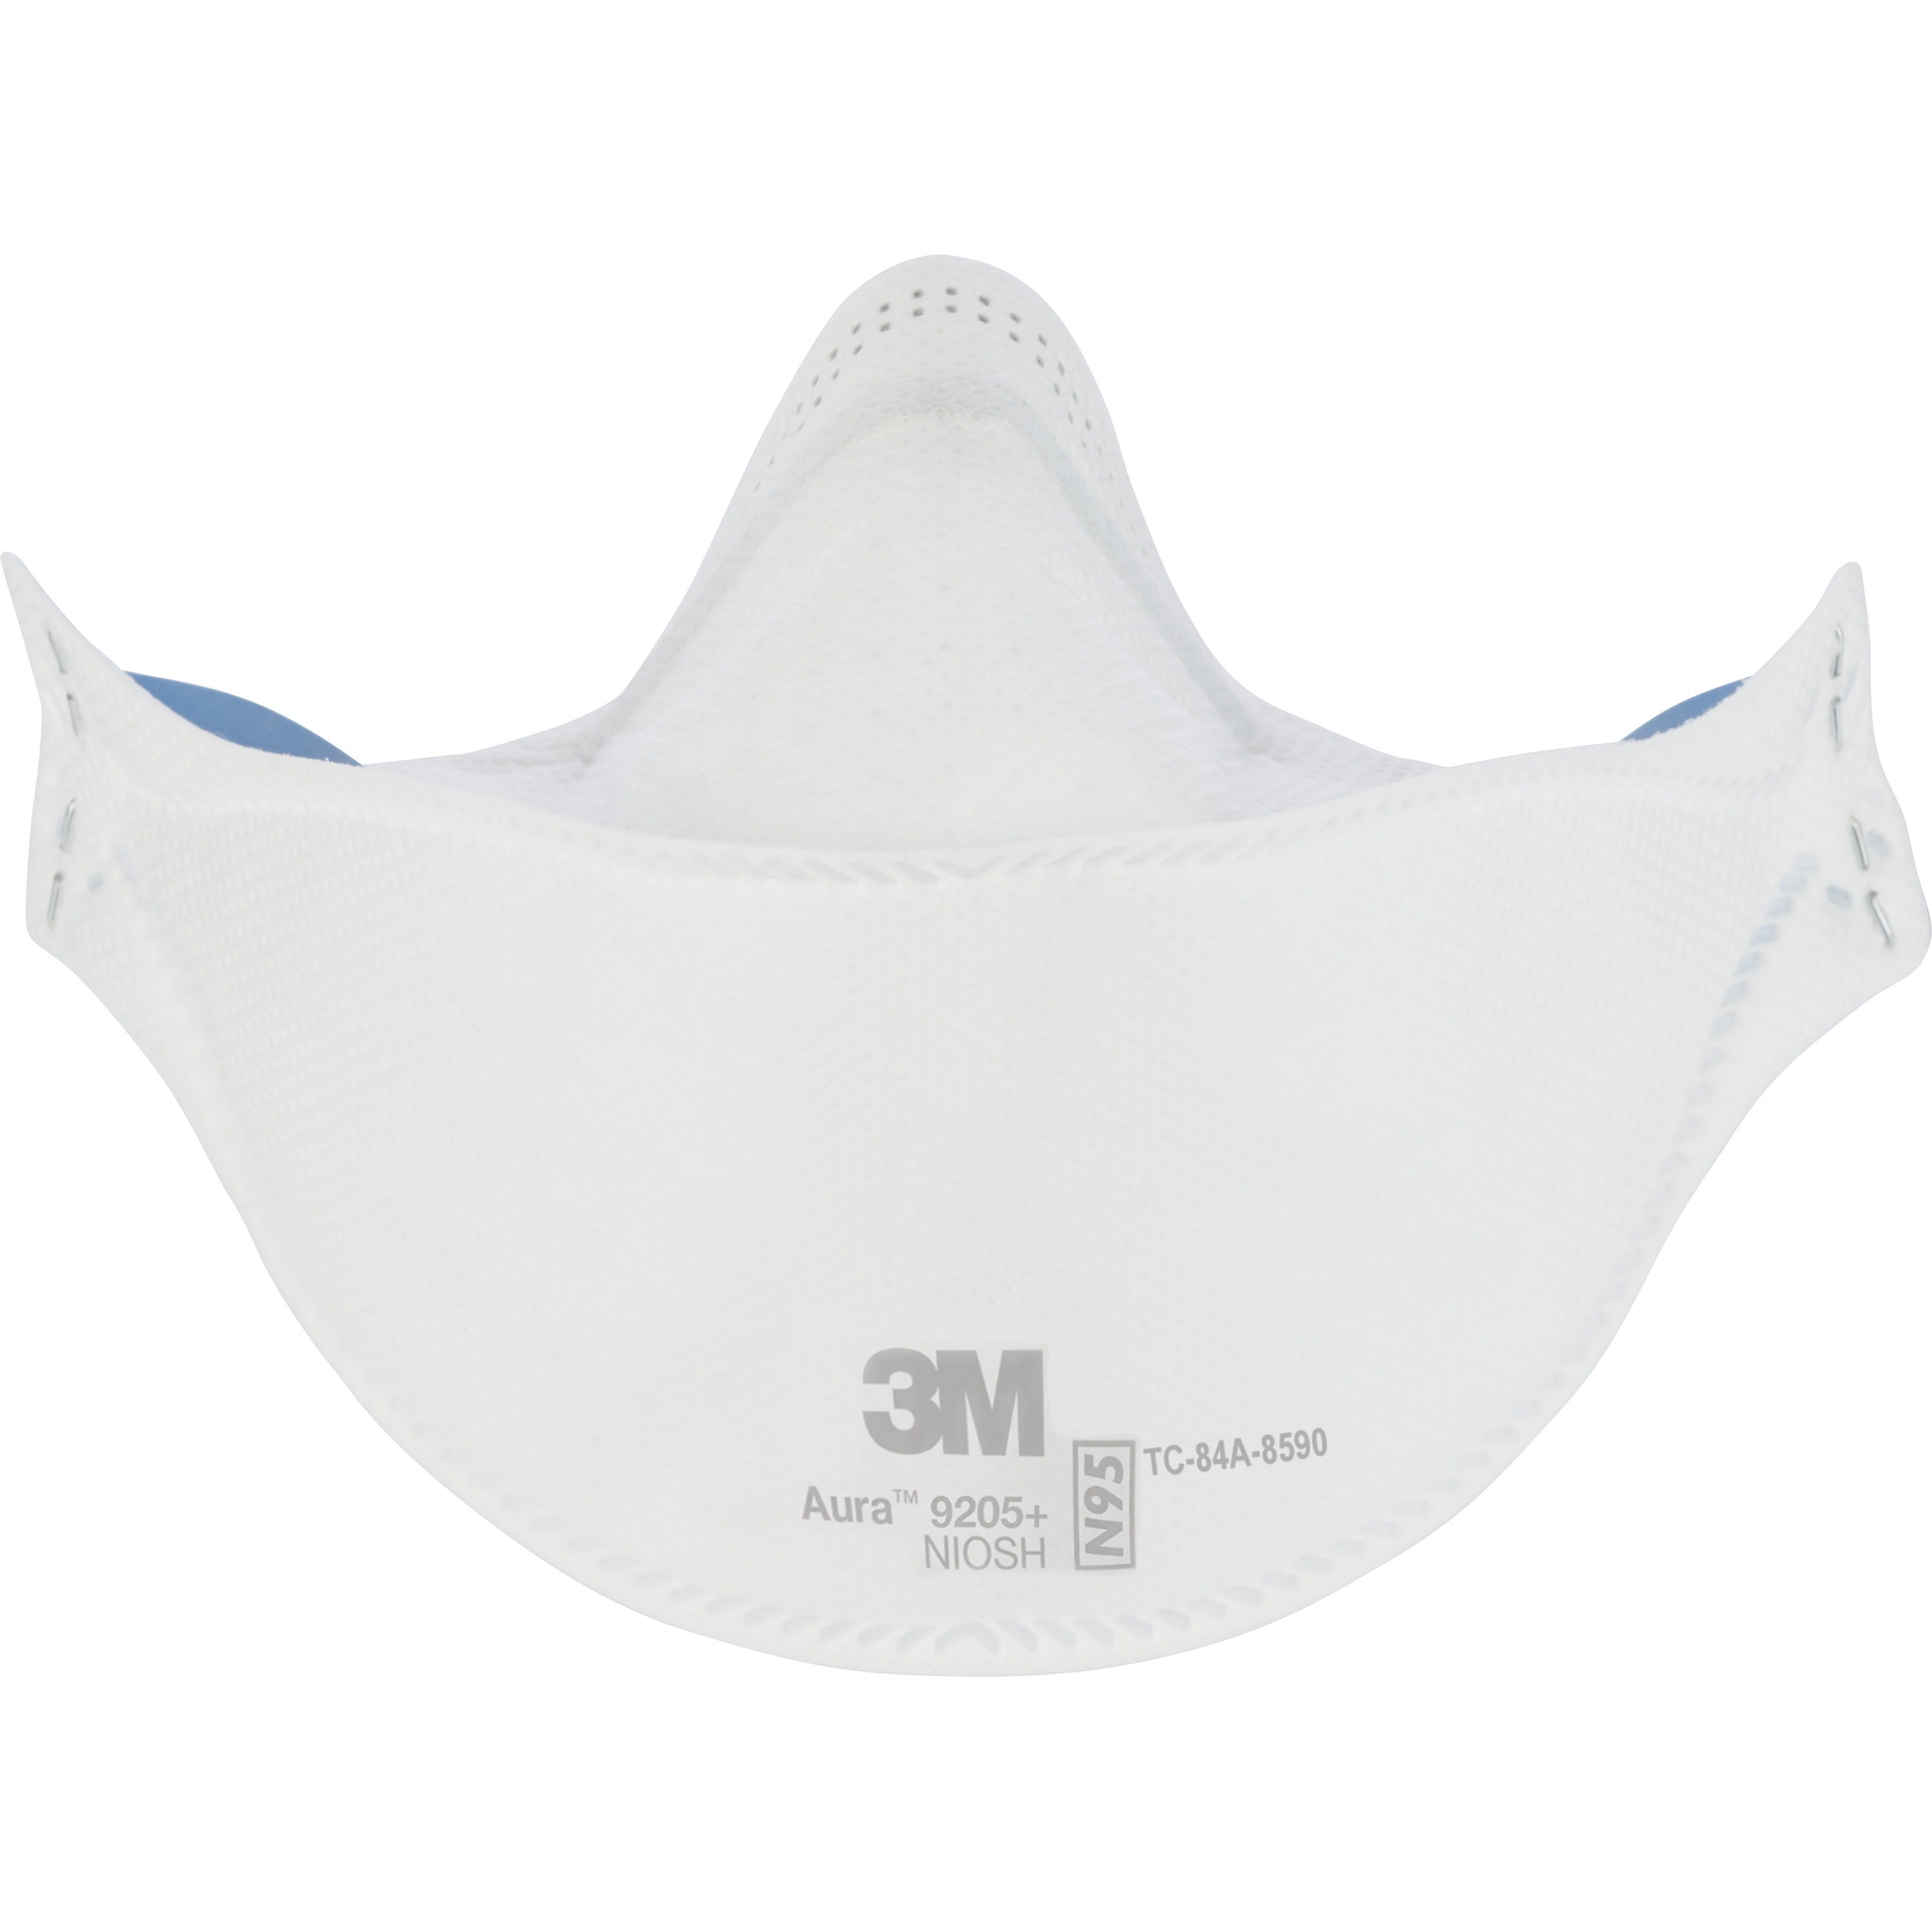 3m-aura-n95-particulate-respirator-9205-recommended-for-face-adult-size-airborne-particle-dust-contaminant-fog-protection-white-lightweight-soft-comfortable-adjustable-nose-clip-disposable-advanced-electret-media-10-pack_mmm9205p10dc - 4